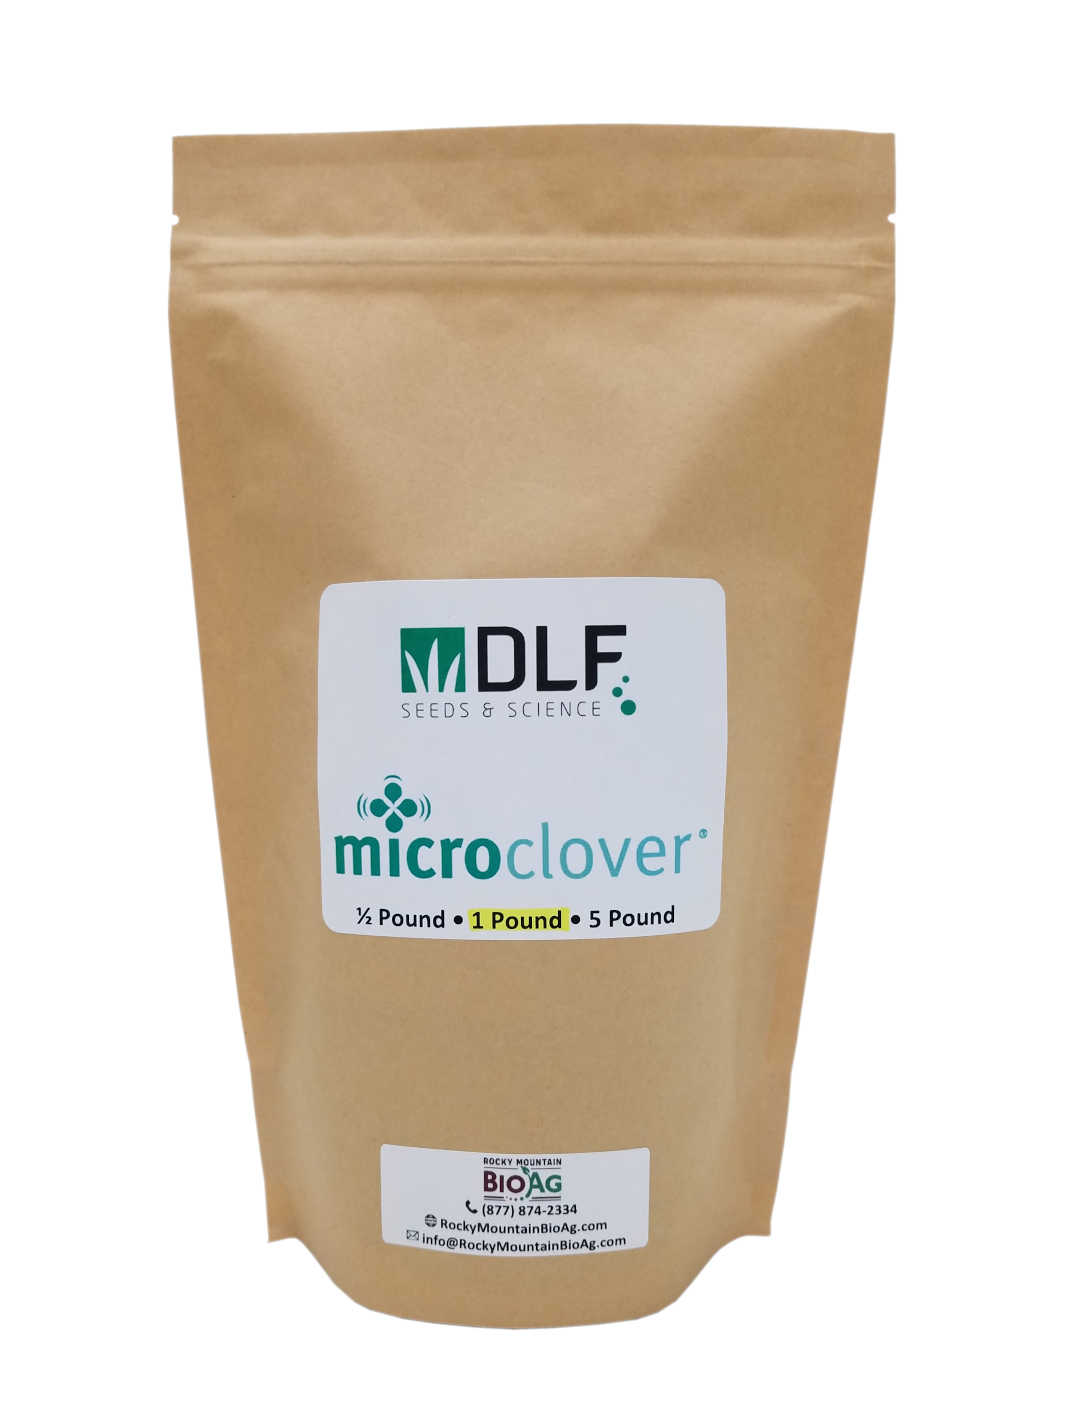 DLF Microclover Lawn Seeds in 1lb Bag